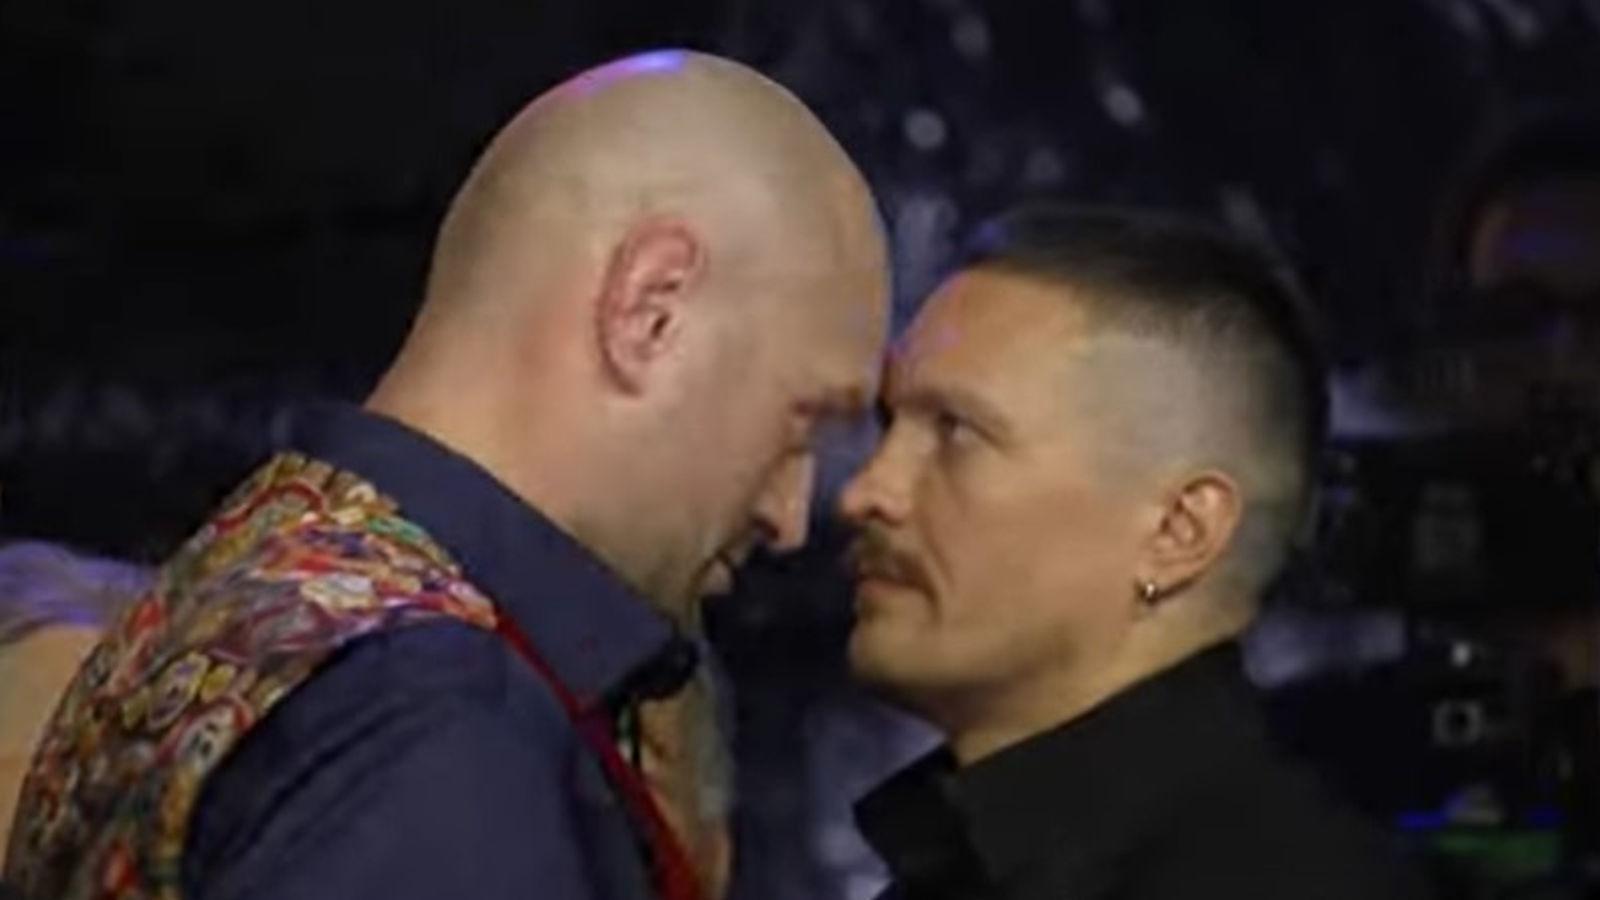 Tyson Fury will fight Oleksandr Usyk for the right to become undisputed heavyweight world champion